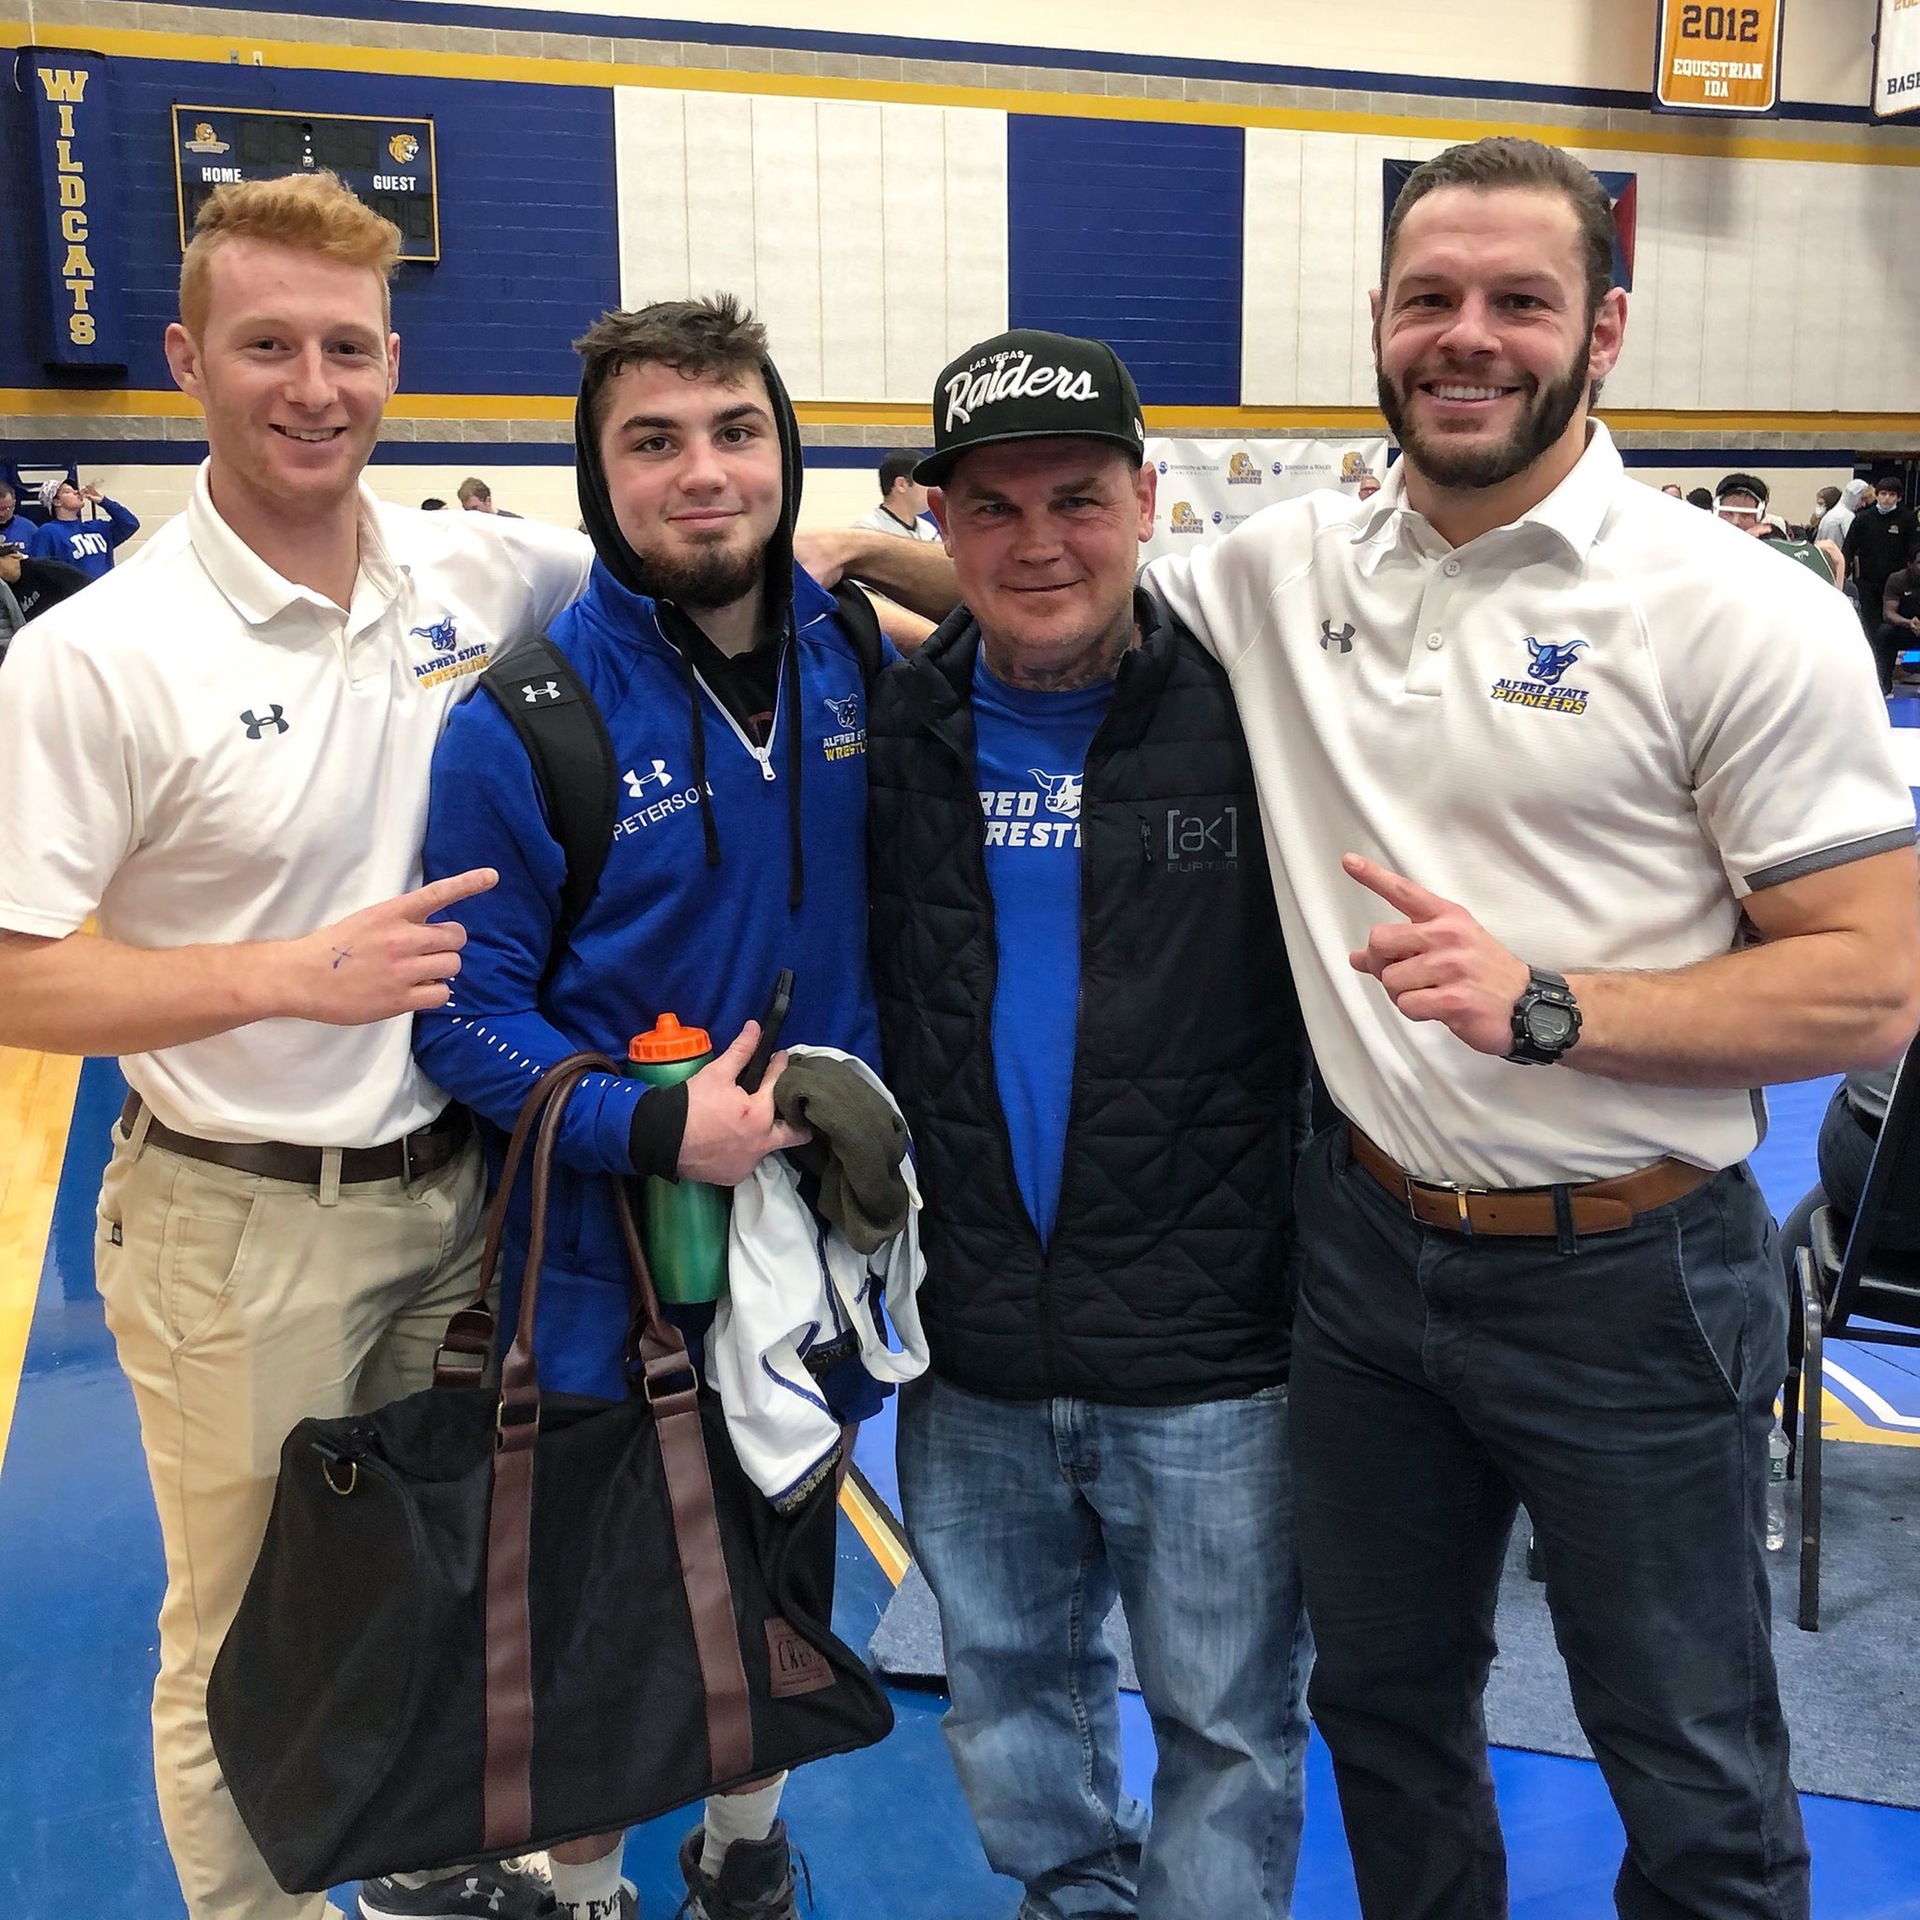 Sean Peterson, pictured with Coach Johnson, his dad (legendary MMA Referee Keith Peterson) and Coach Signorelli